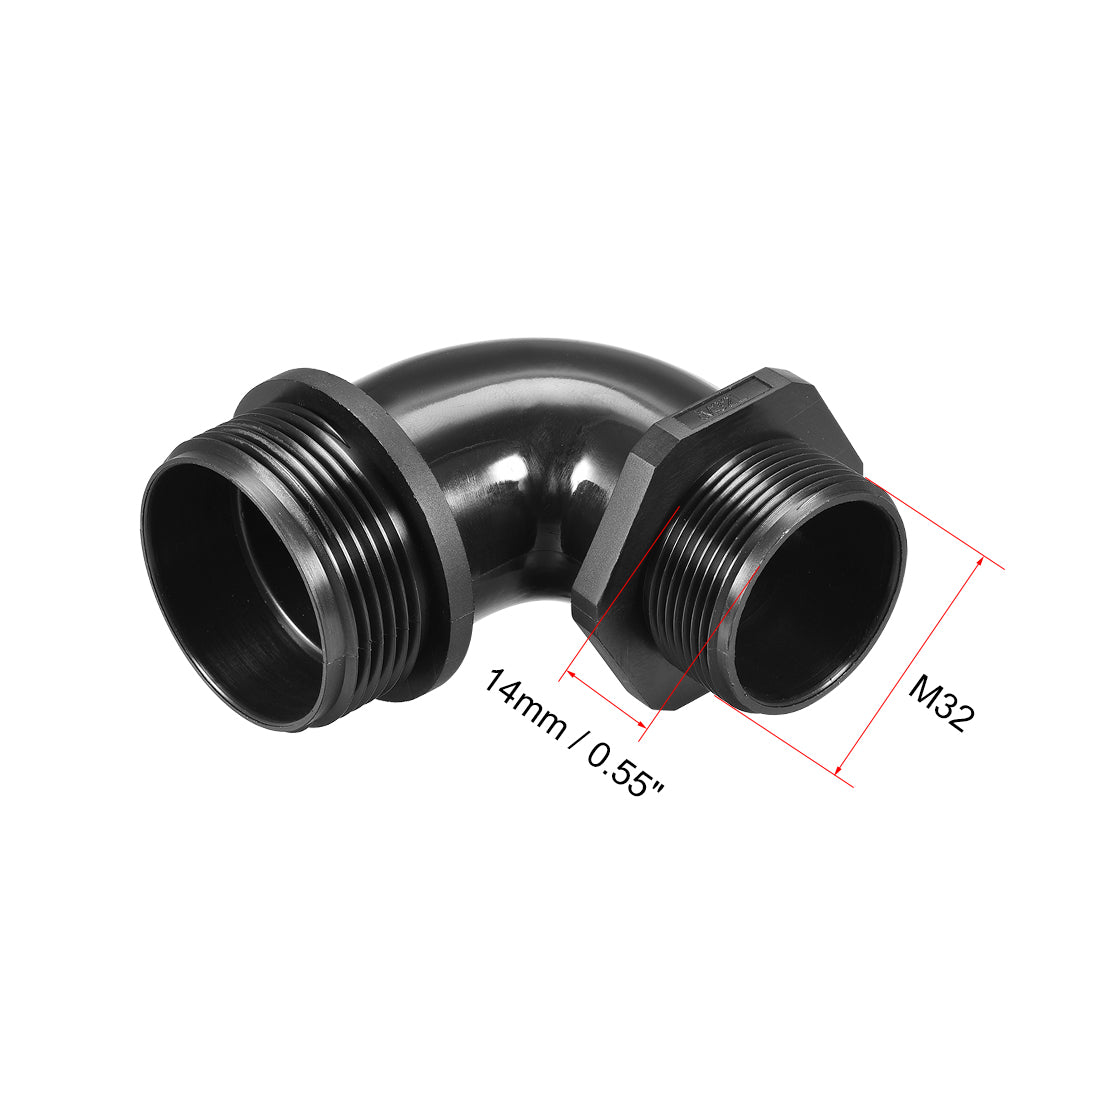 uxcell Uxcell M32 Cable Gland , 90 Degree Waterproof IP68 Nylon Joint Adjustable Locknut for 18mm-25mm Dia Cable Wire